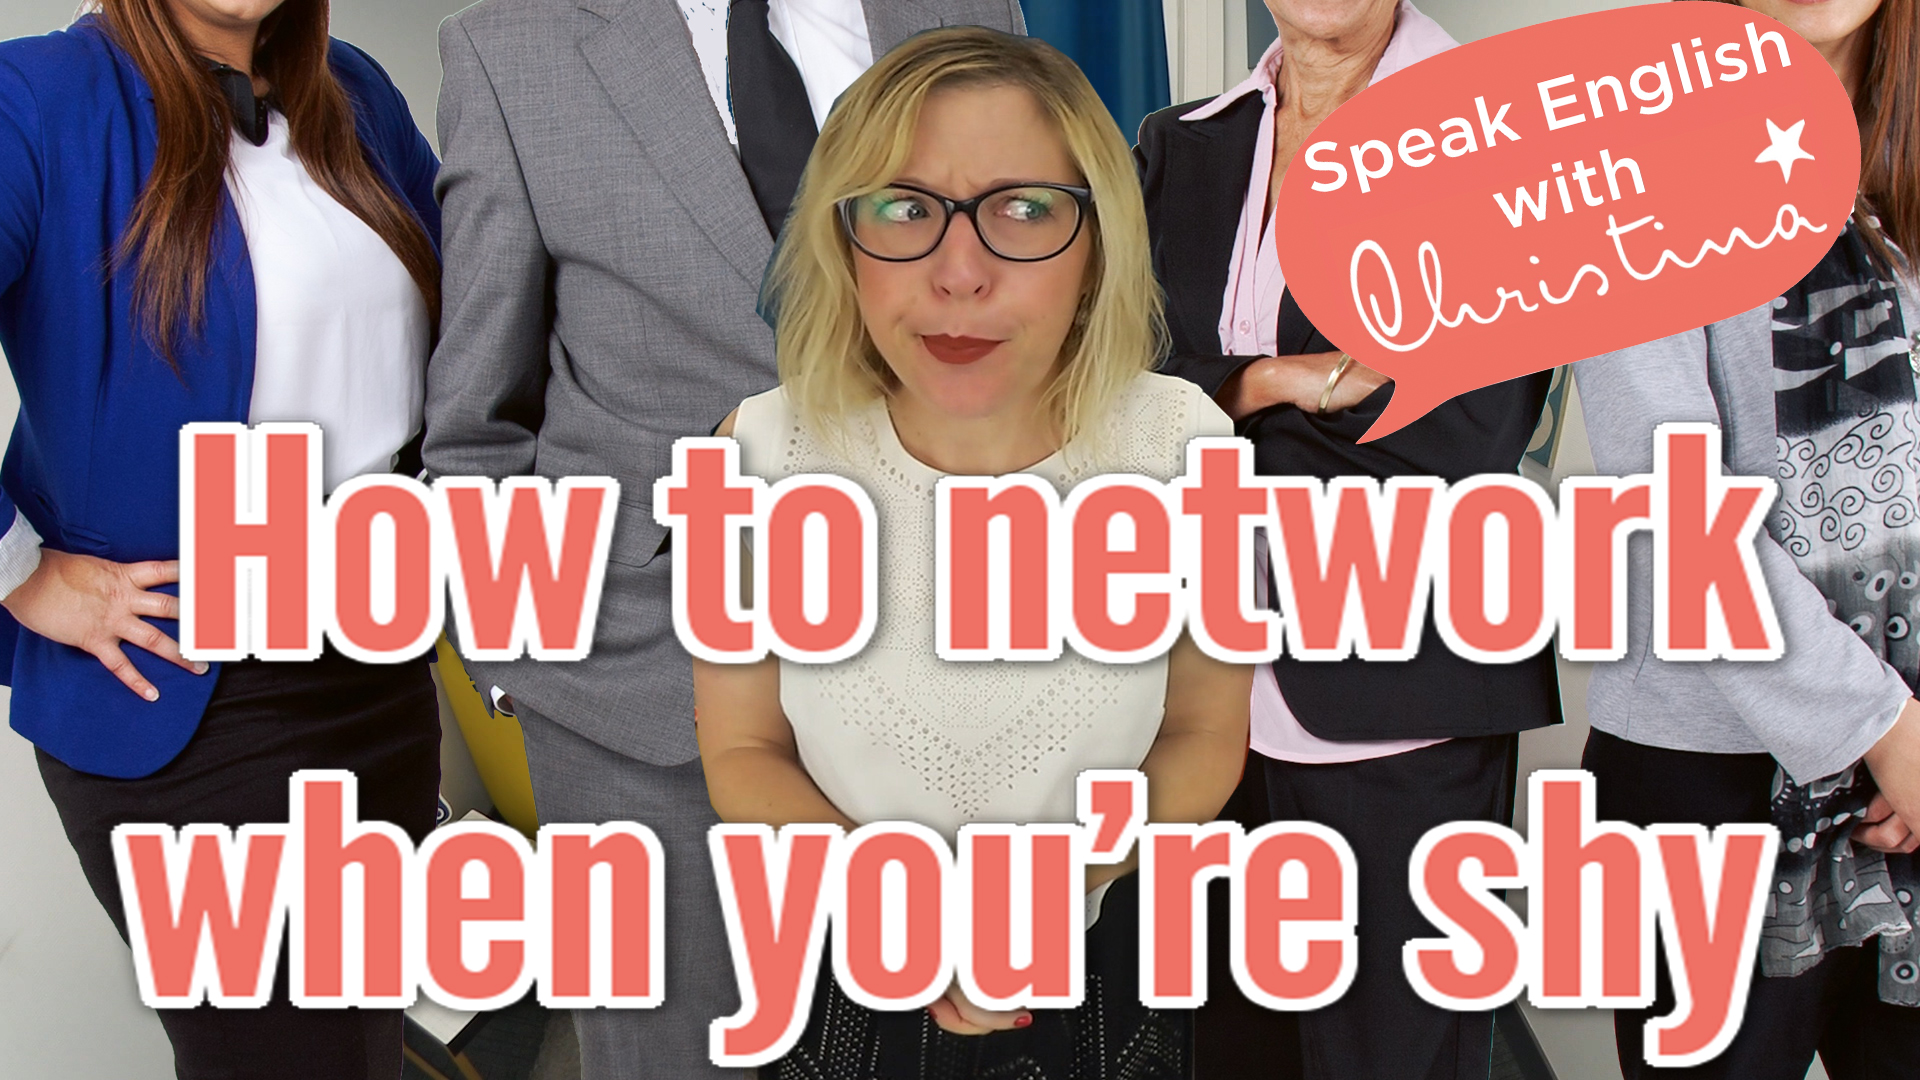 How to network when you’re shy in English